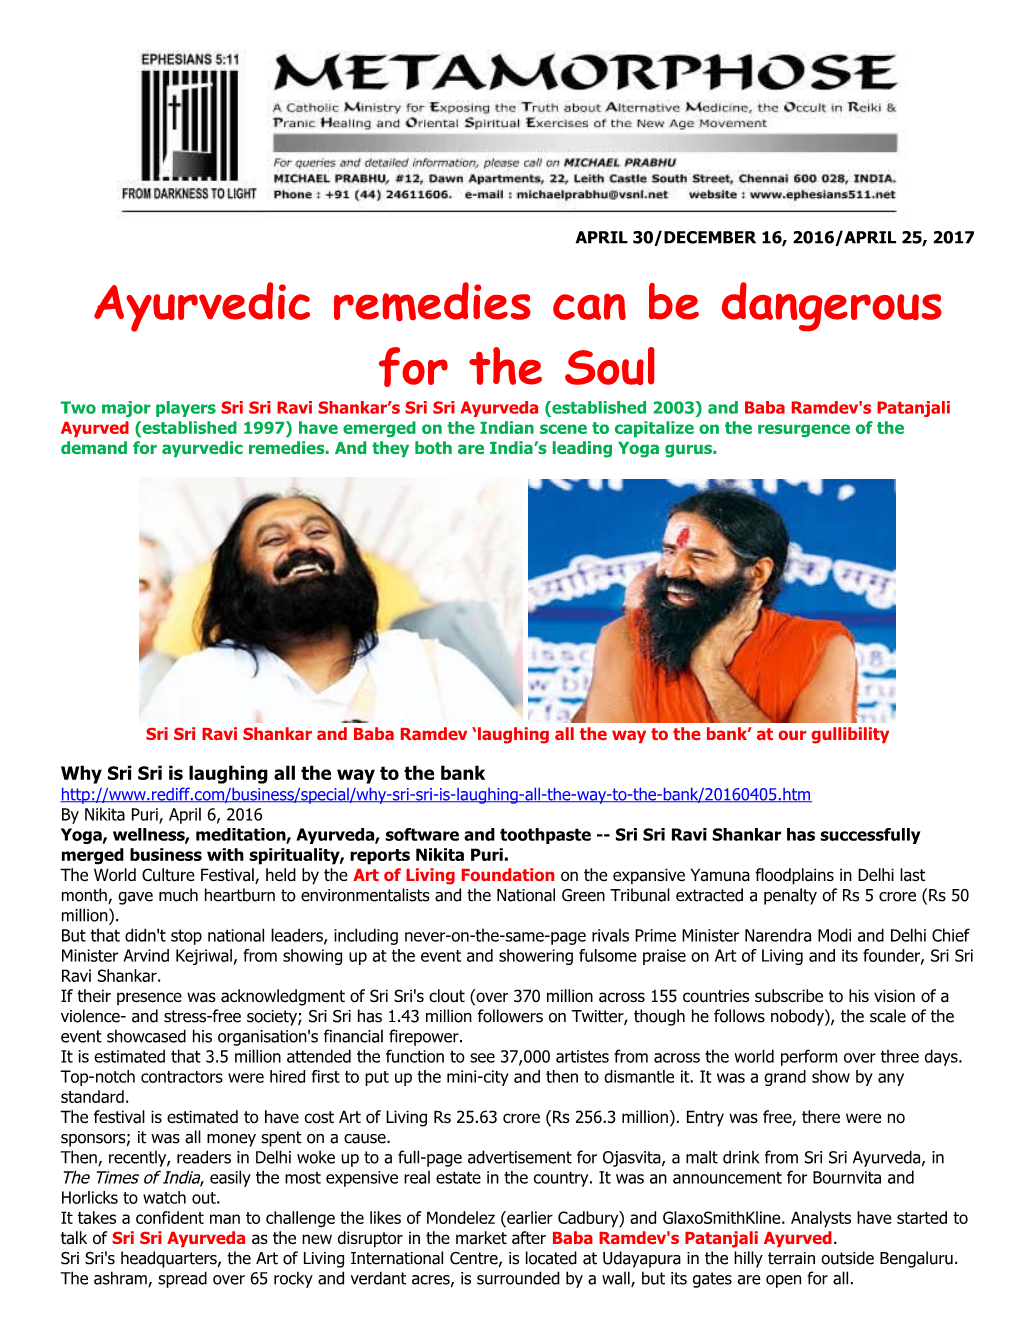 Ayurvedic Remedies Can Be Dangerous for the Soul